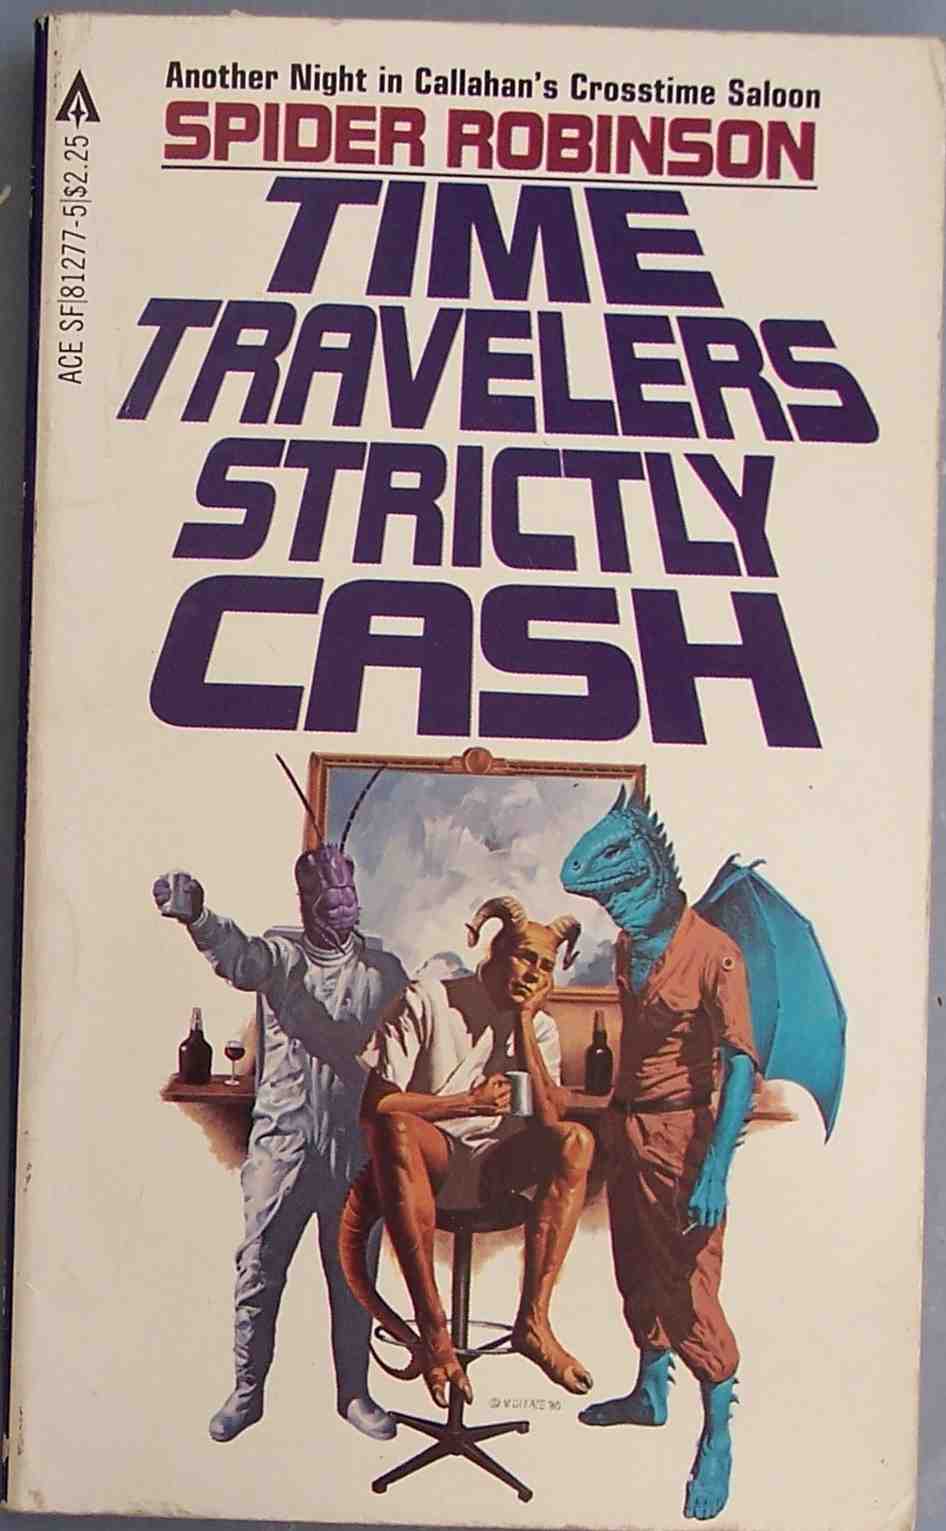 the cover to spider robinson's time travelers and stracy cash